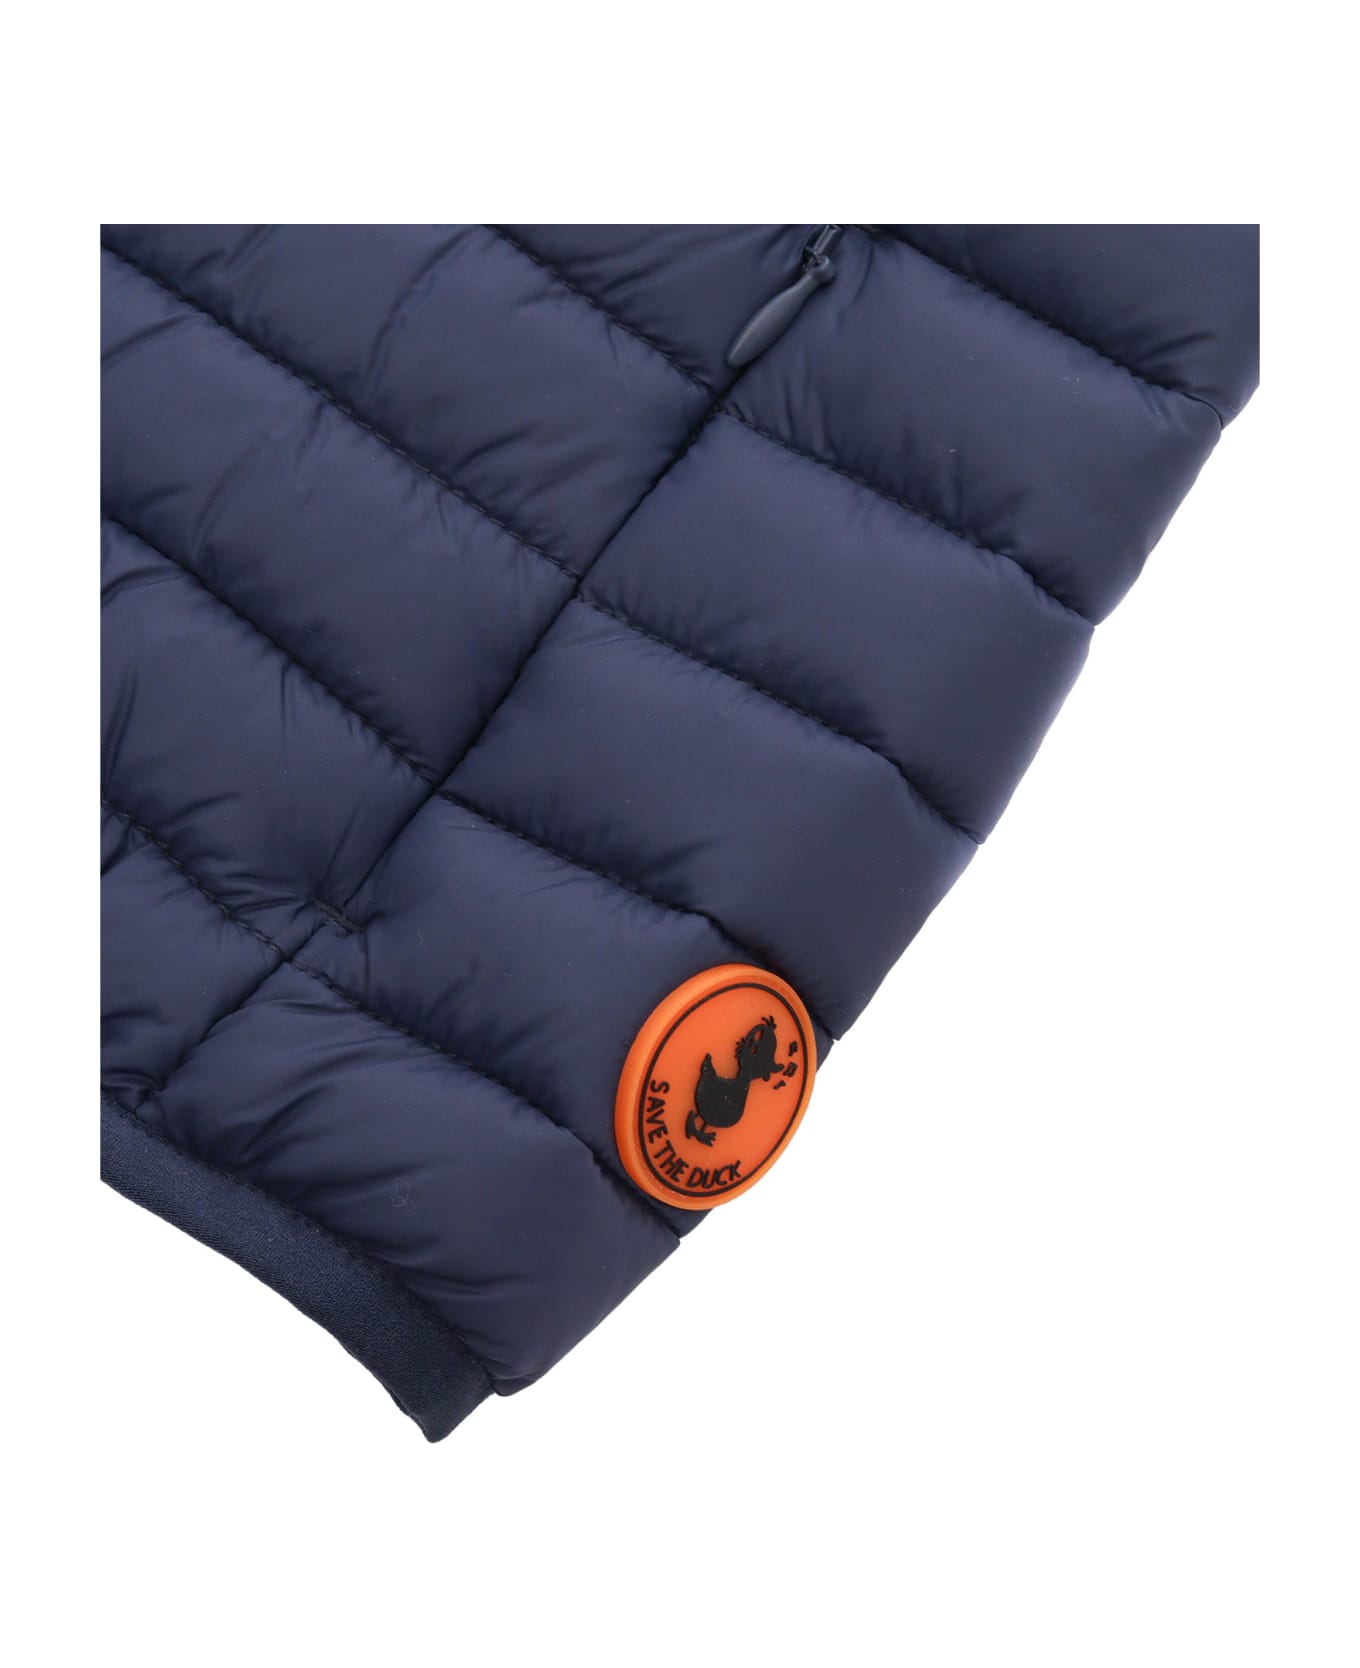 Save the Duck Padded Vest For Children - BLUE ボトムス